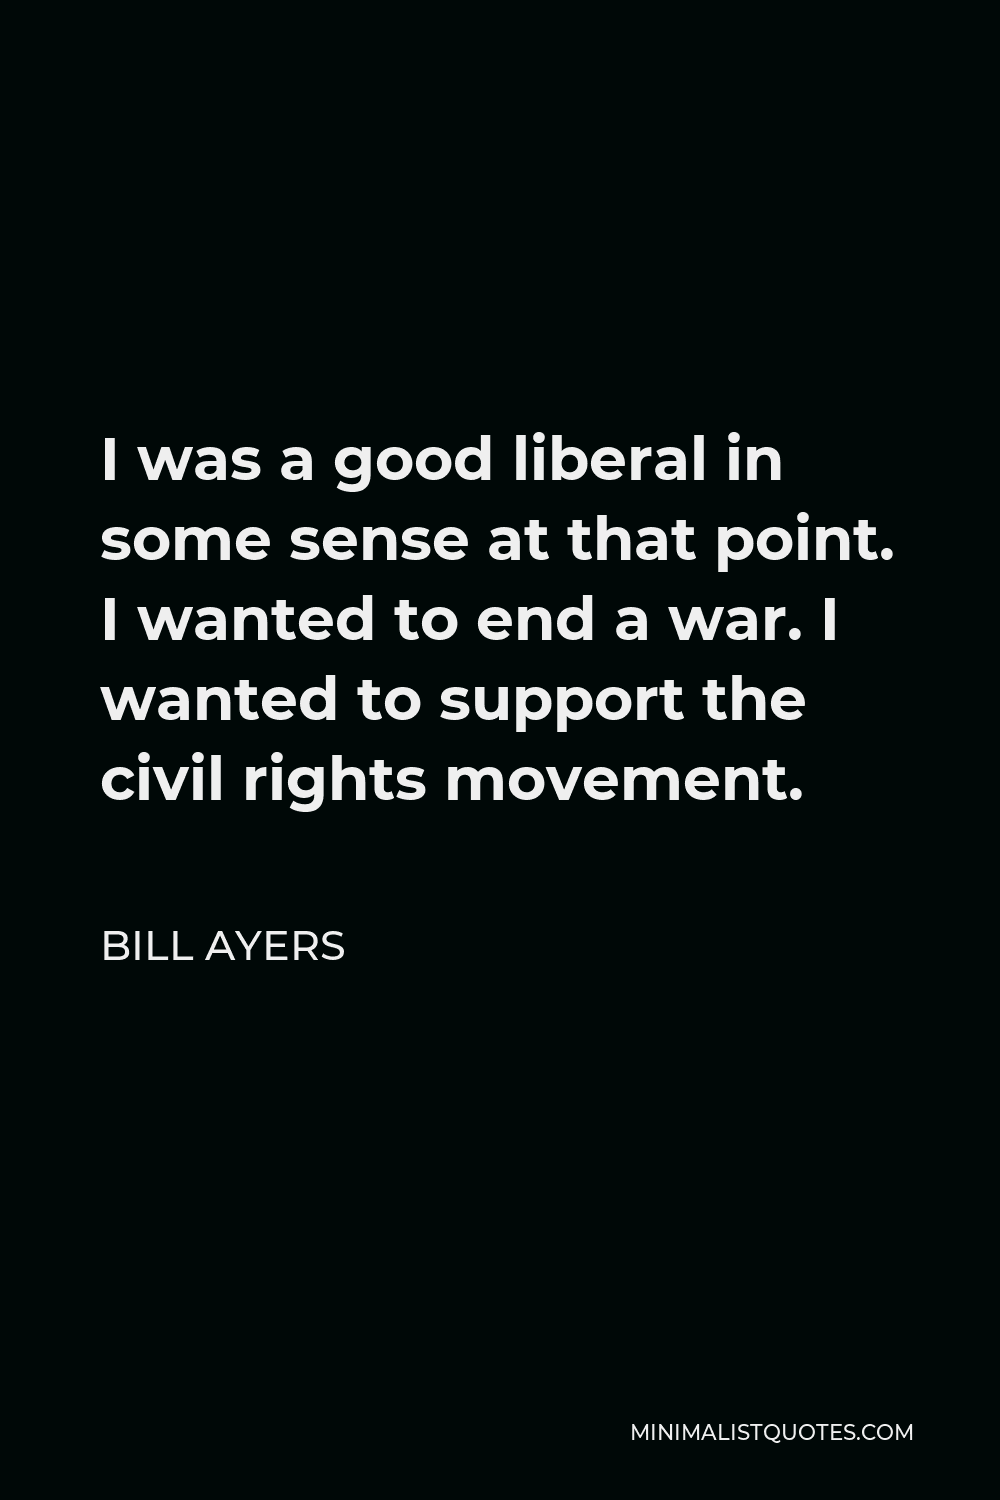 Bill Ayers Quote - I was a good liberal in some sense at that point. I wanted to end a war. I wanted to support the civil rights movement.